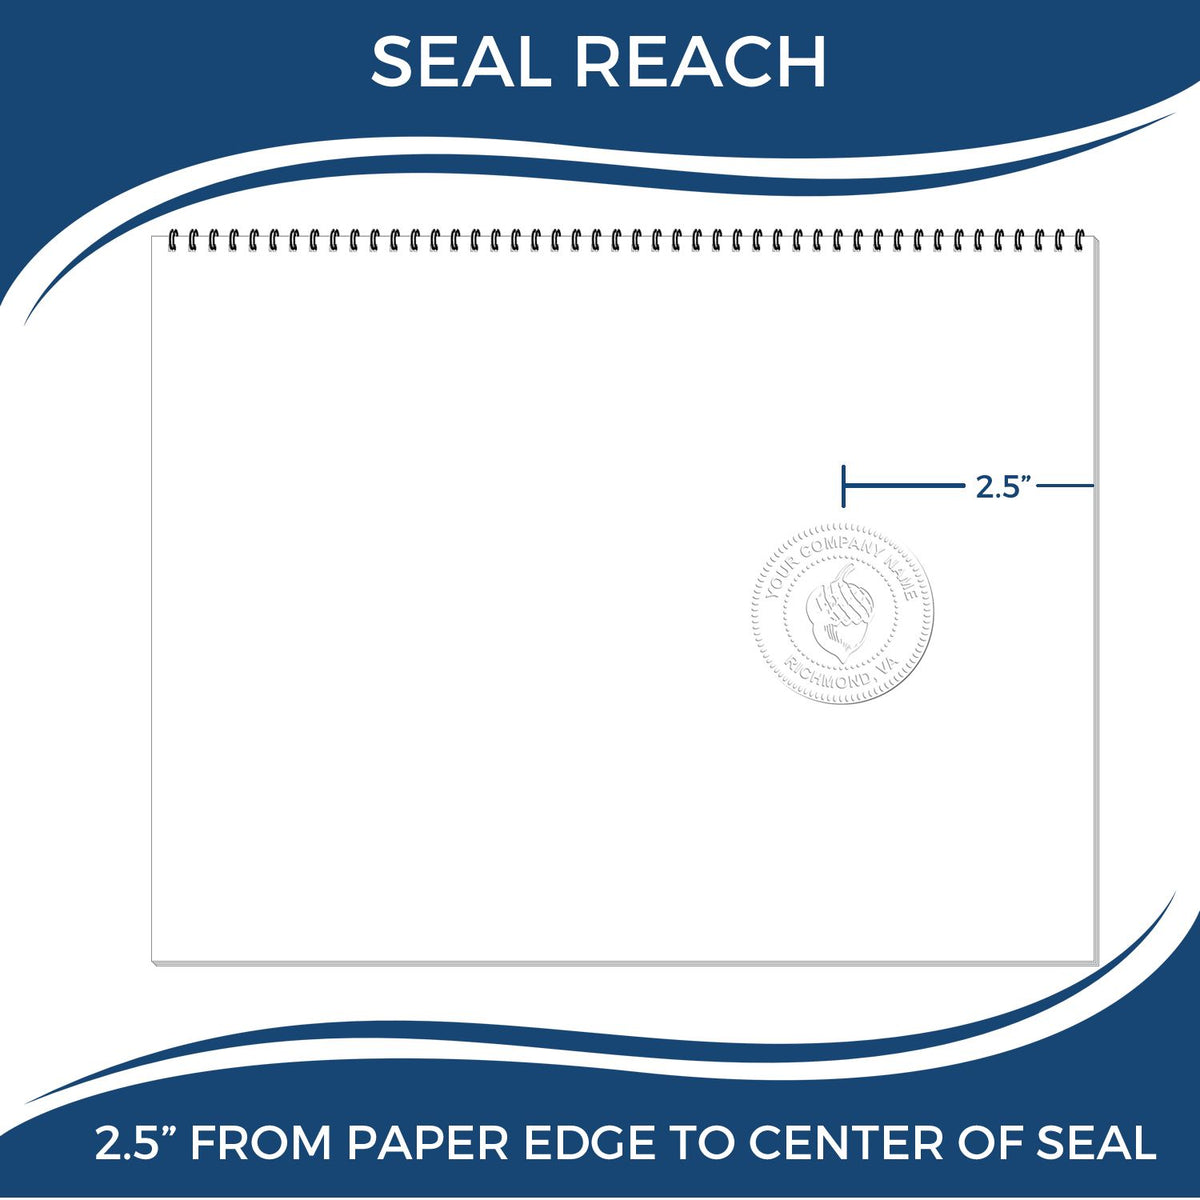 An infographic showing the seal reach which is represented by a ruler and a miniature seal image of the State of Idaho Long Reach Architectural Embossing Seal